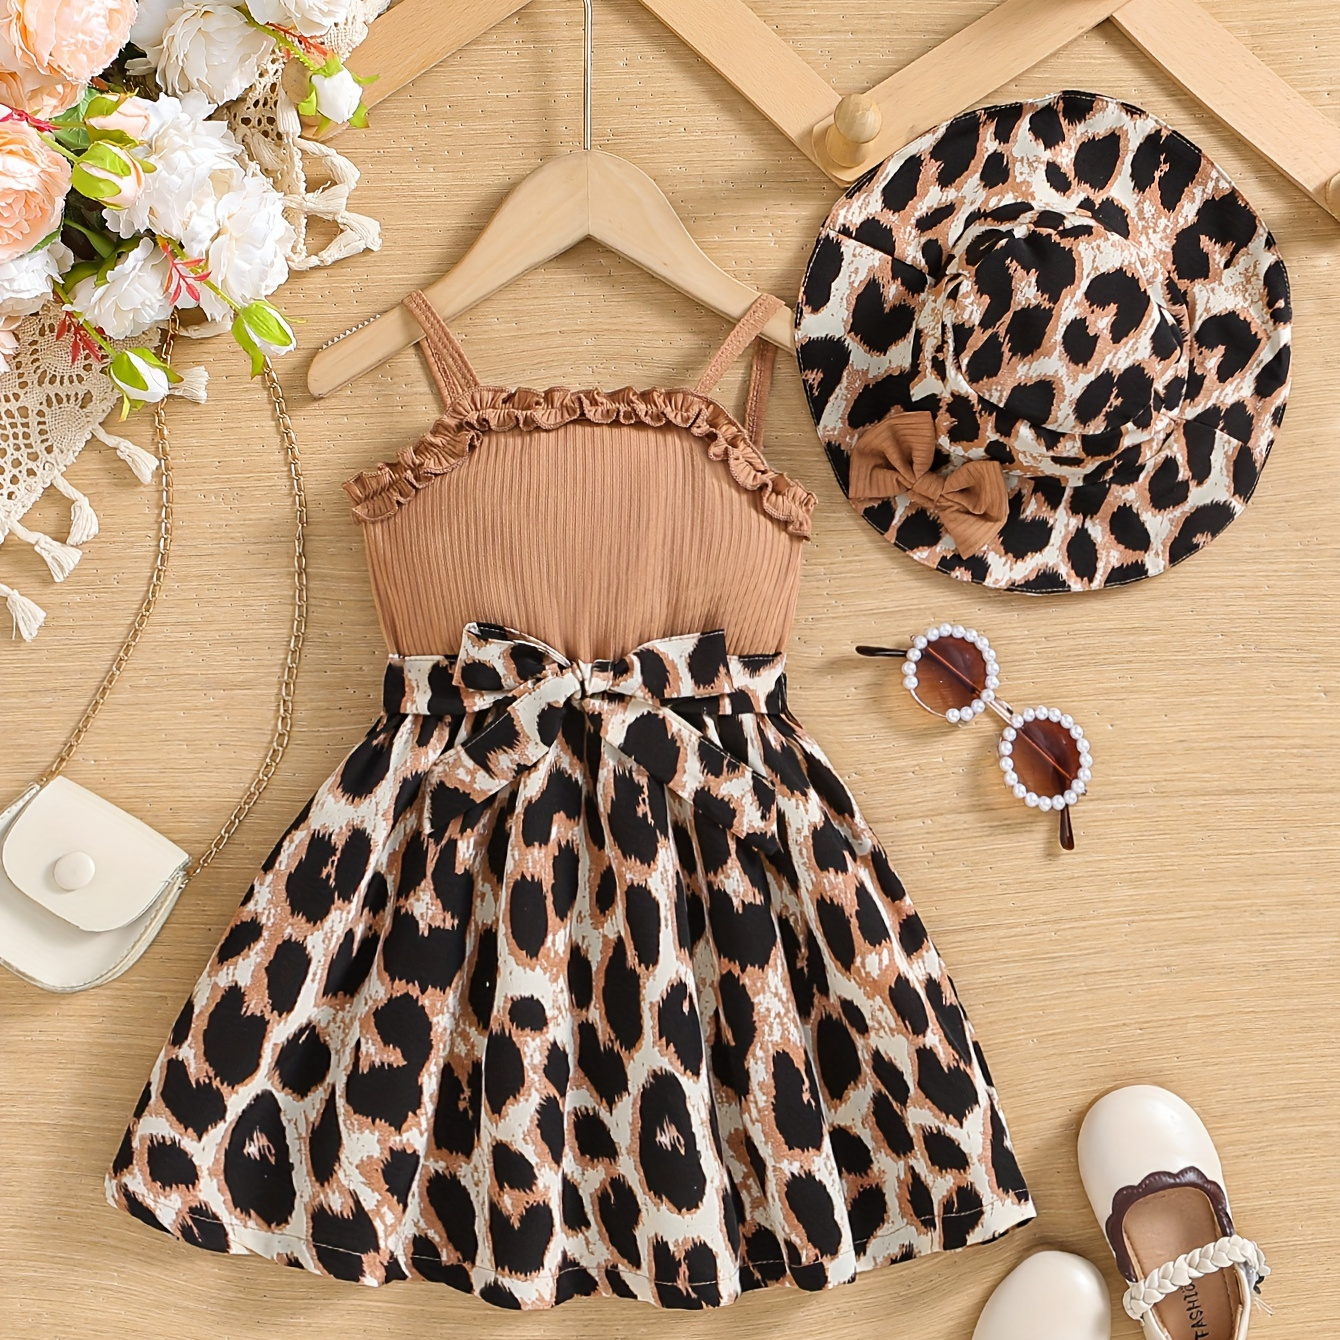 

Baby Toddler Girls Stylish Lace Edge Suspender Pit Striped Dress Stitching Full Leopard Print Bottom + Matching Full Print Hat Elegant Style Casual Baby Clothing